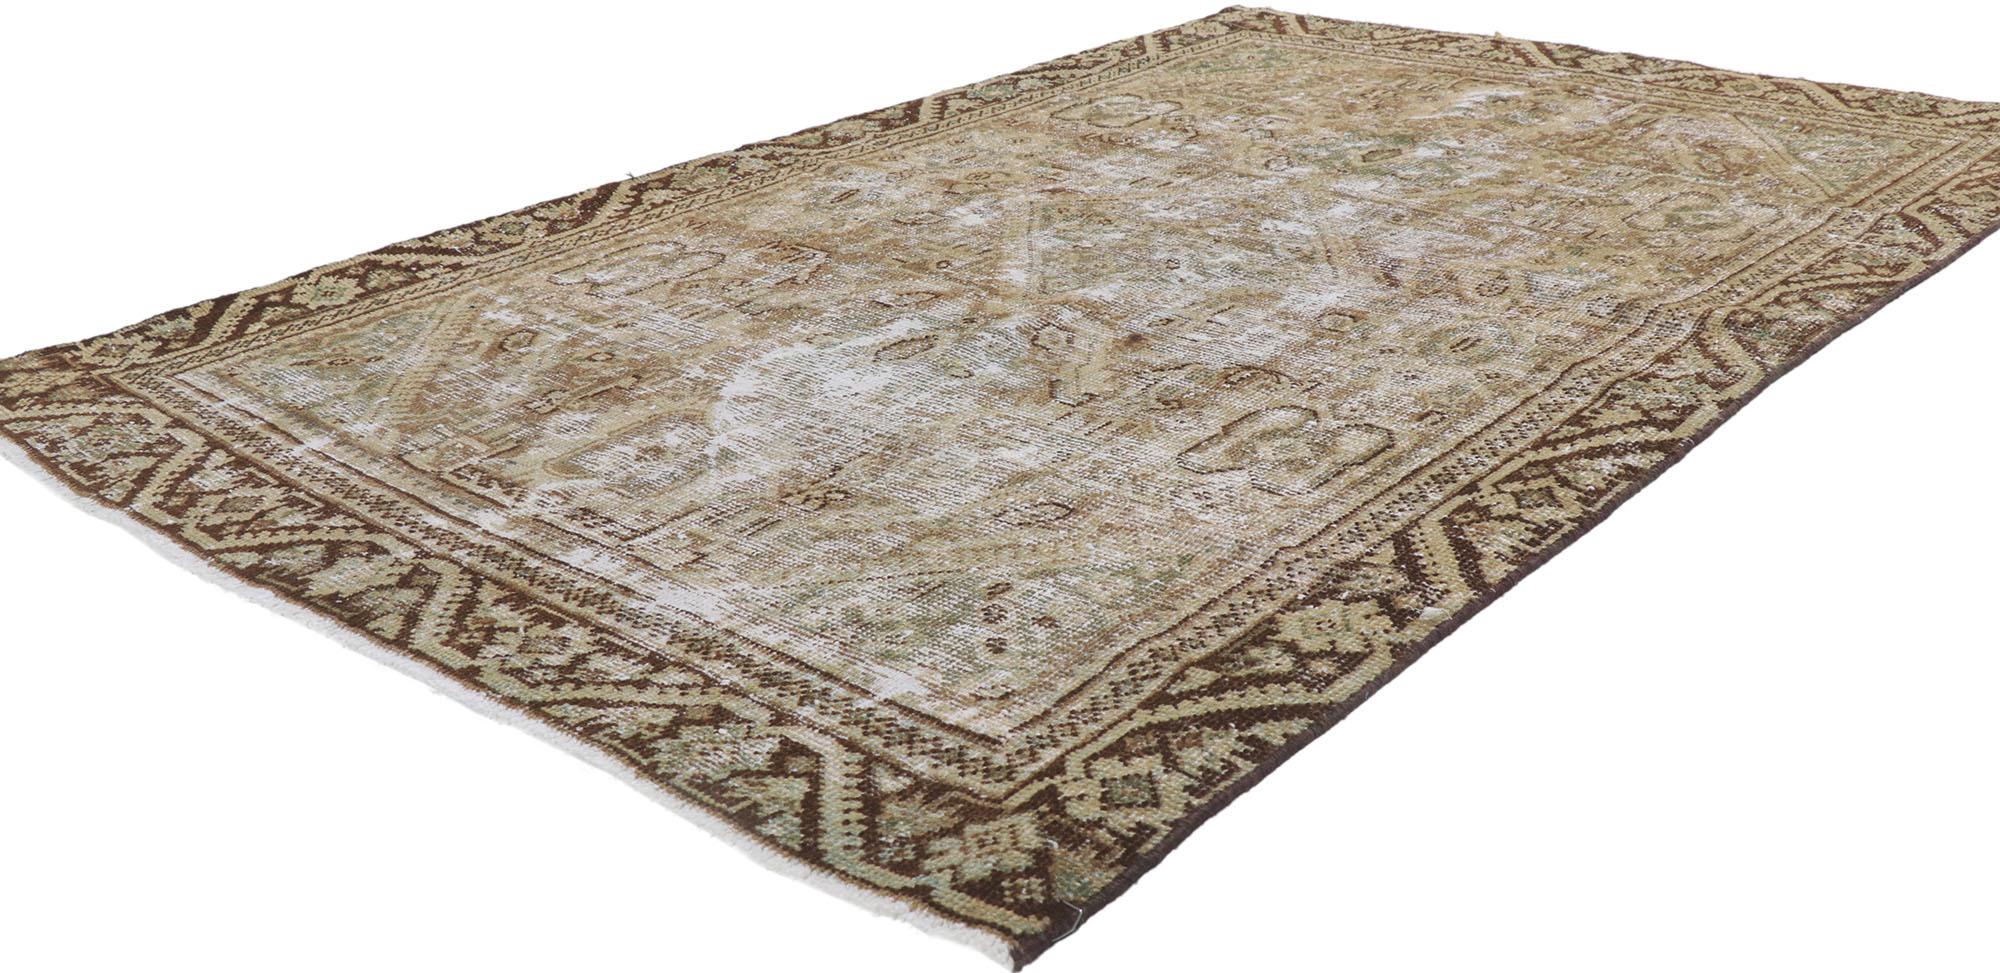 61009 Weathered Distressed Antique Persian Mahal rug 04'00 x 06'04. Emanating sophistication and nomadic charm with rustic sensibility, this hand knotted wool distressed antique Persian Mahal rug beautifully embodies a modern style. The lovingly